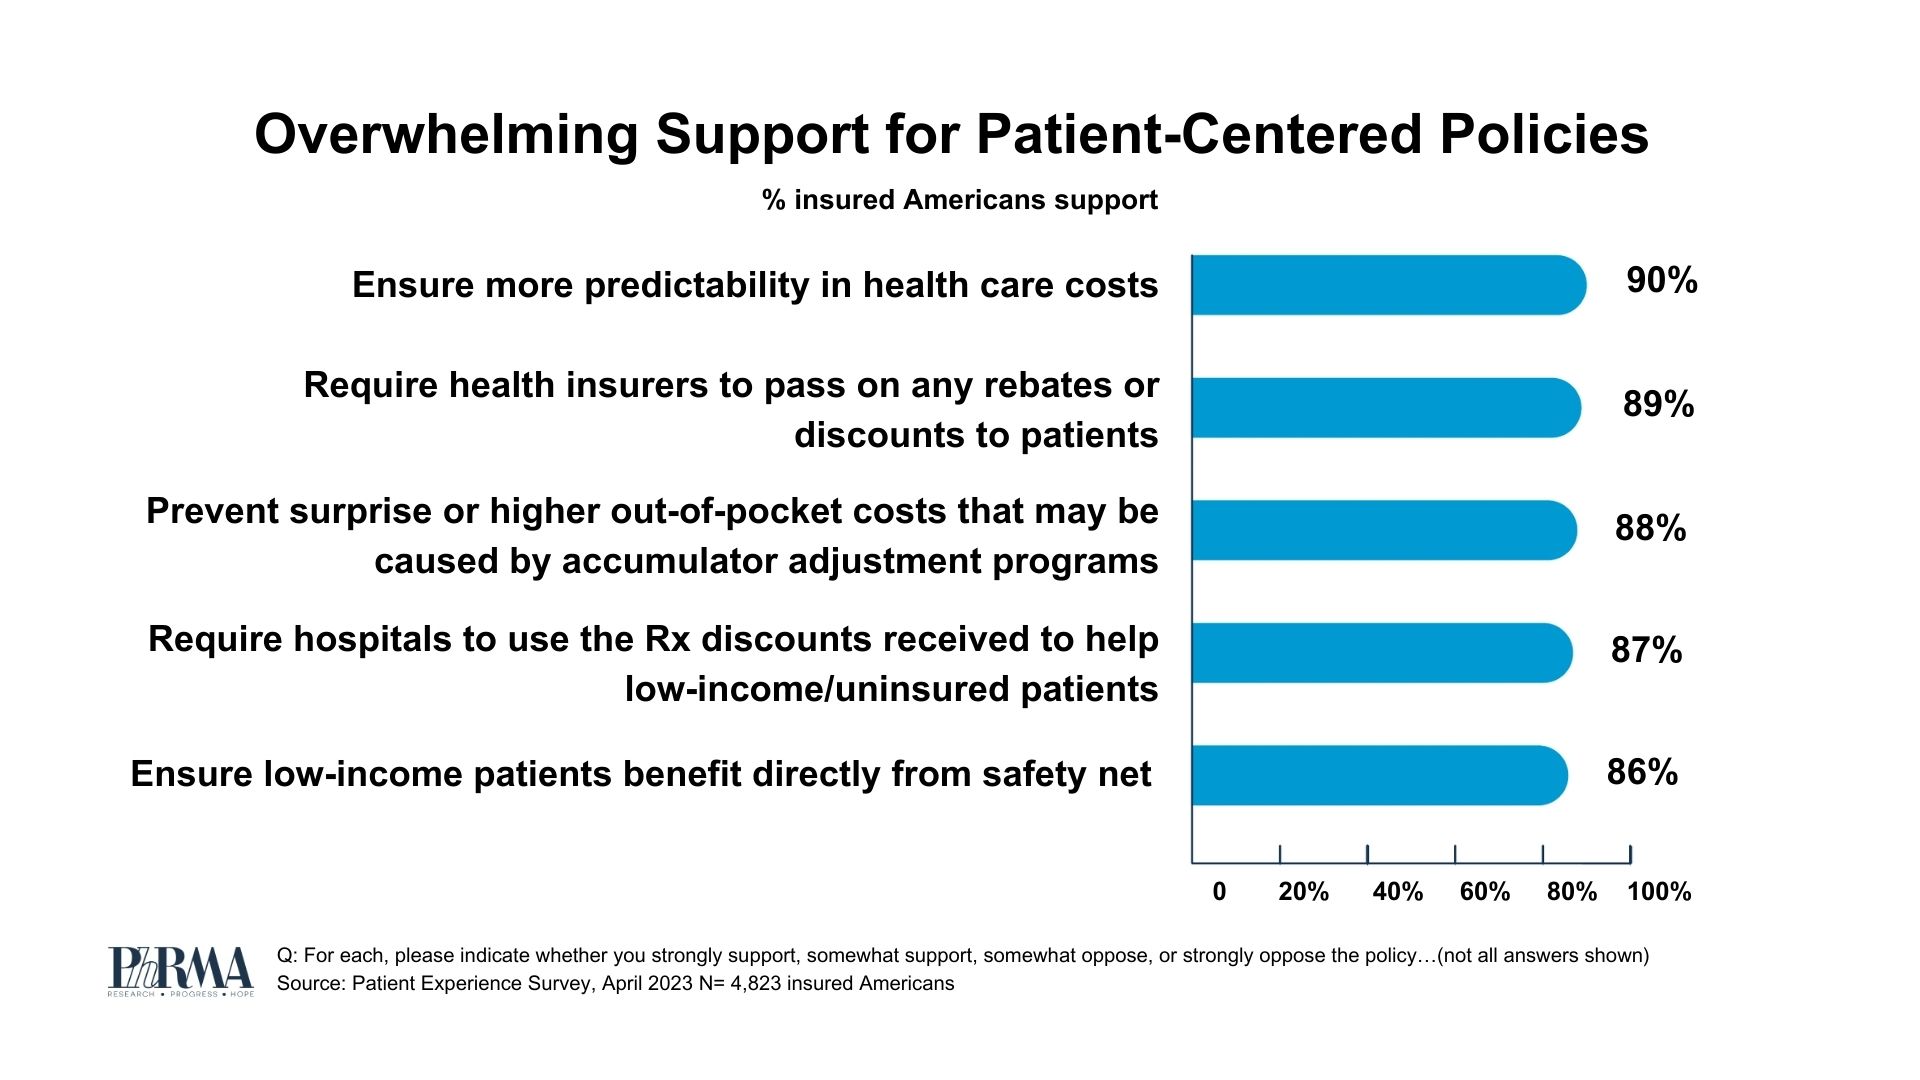 Overwhelming support for patient-centered policies